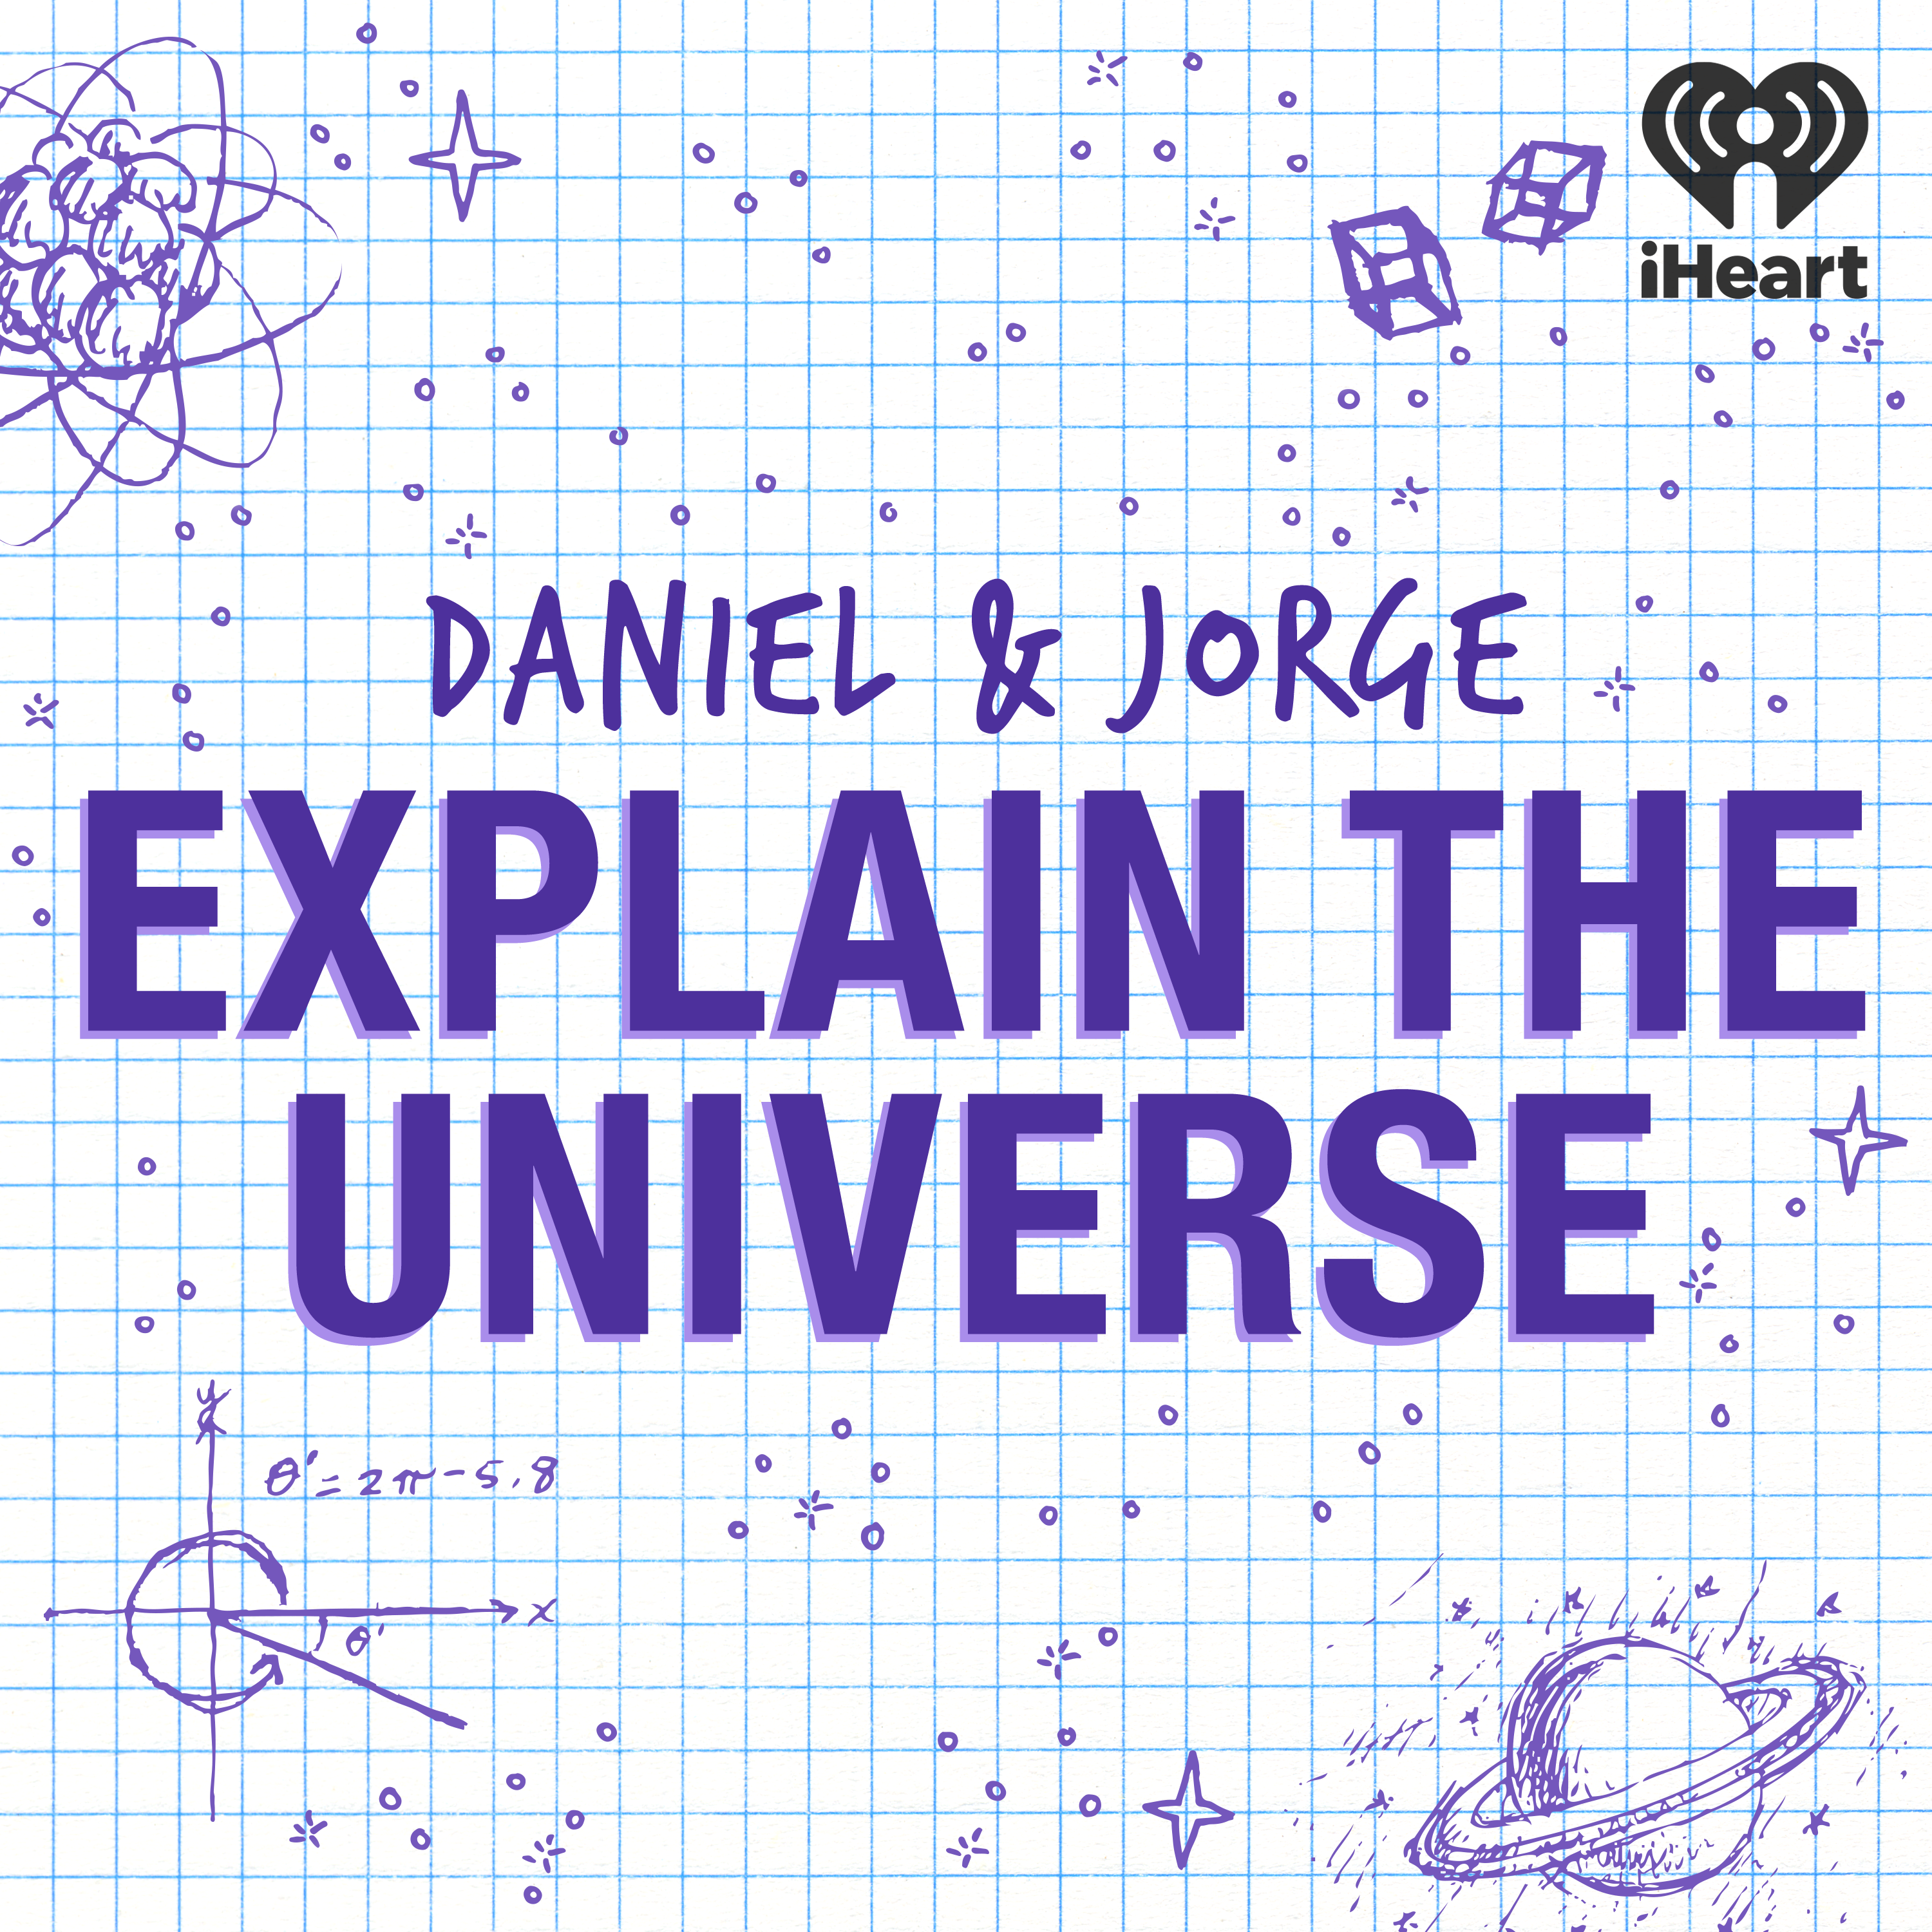 What shapes can galaxies take?